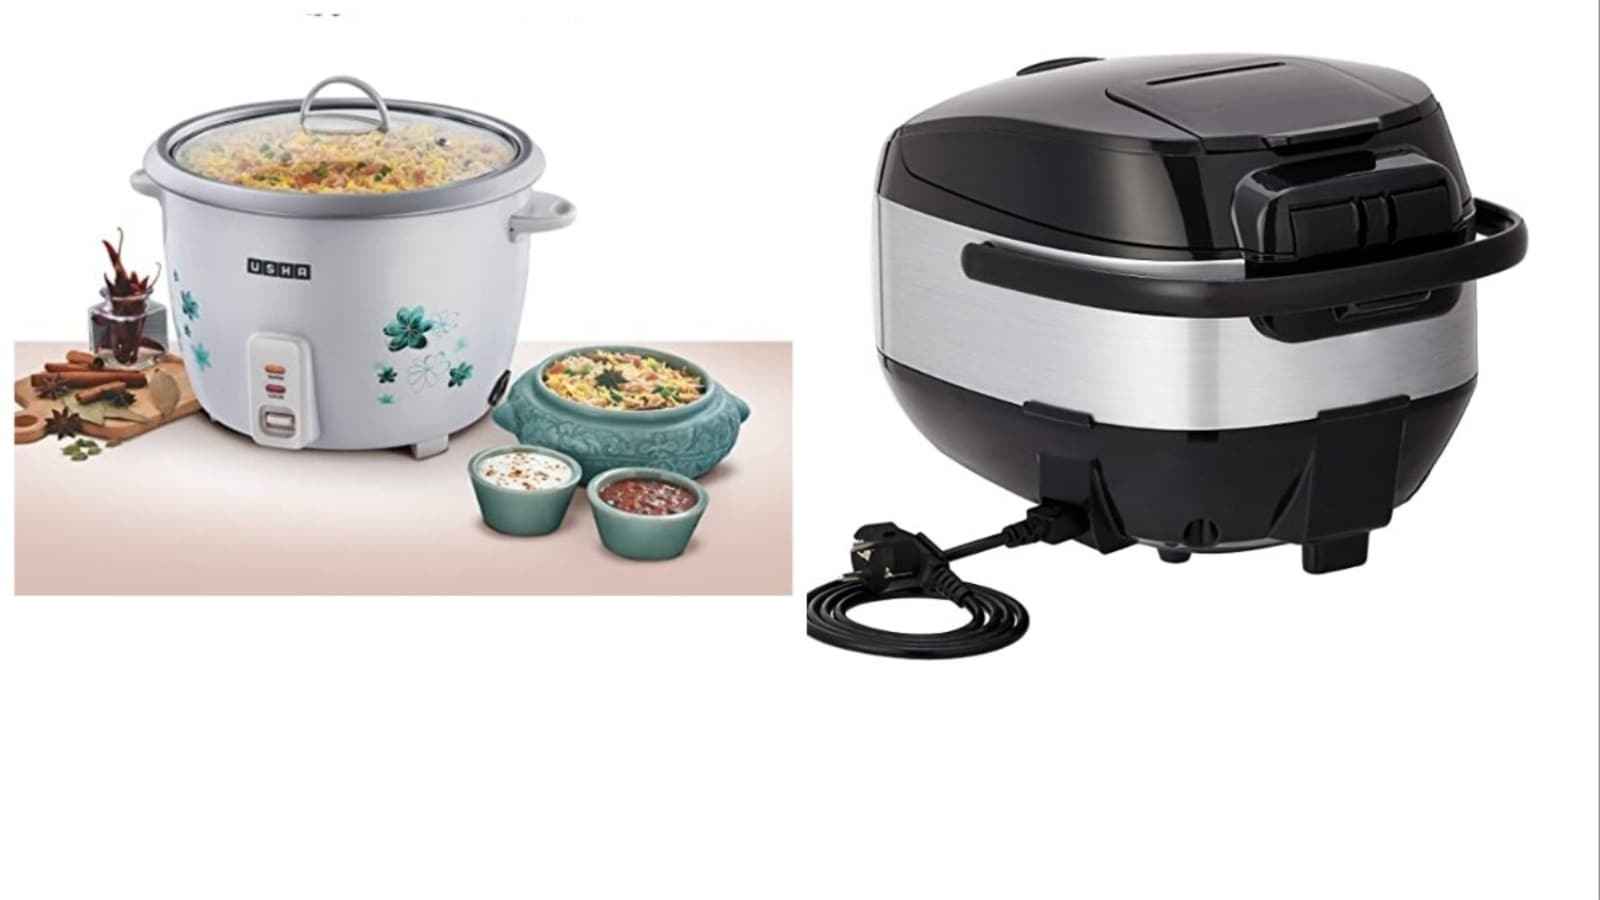 How to Use an Electric Rice Cooker ? - Solara Home